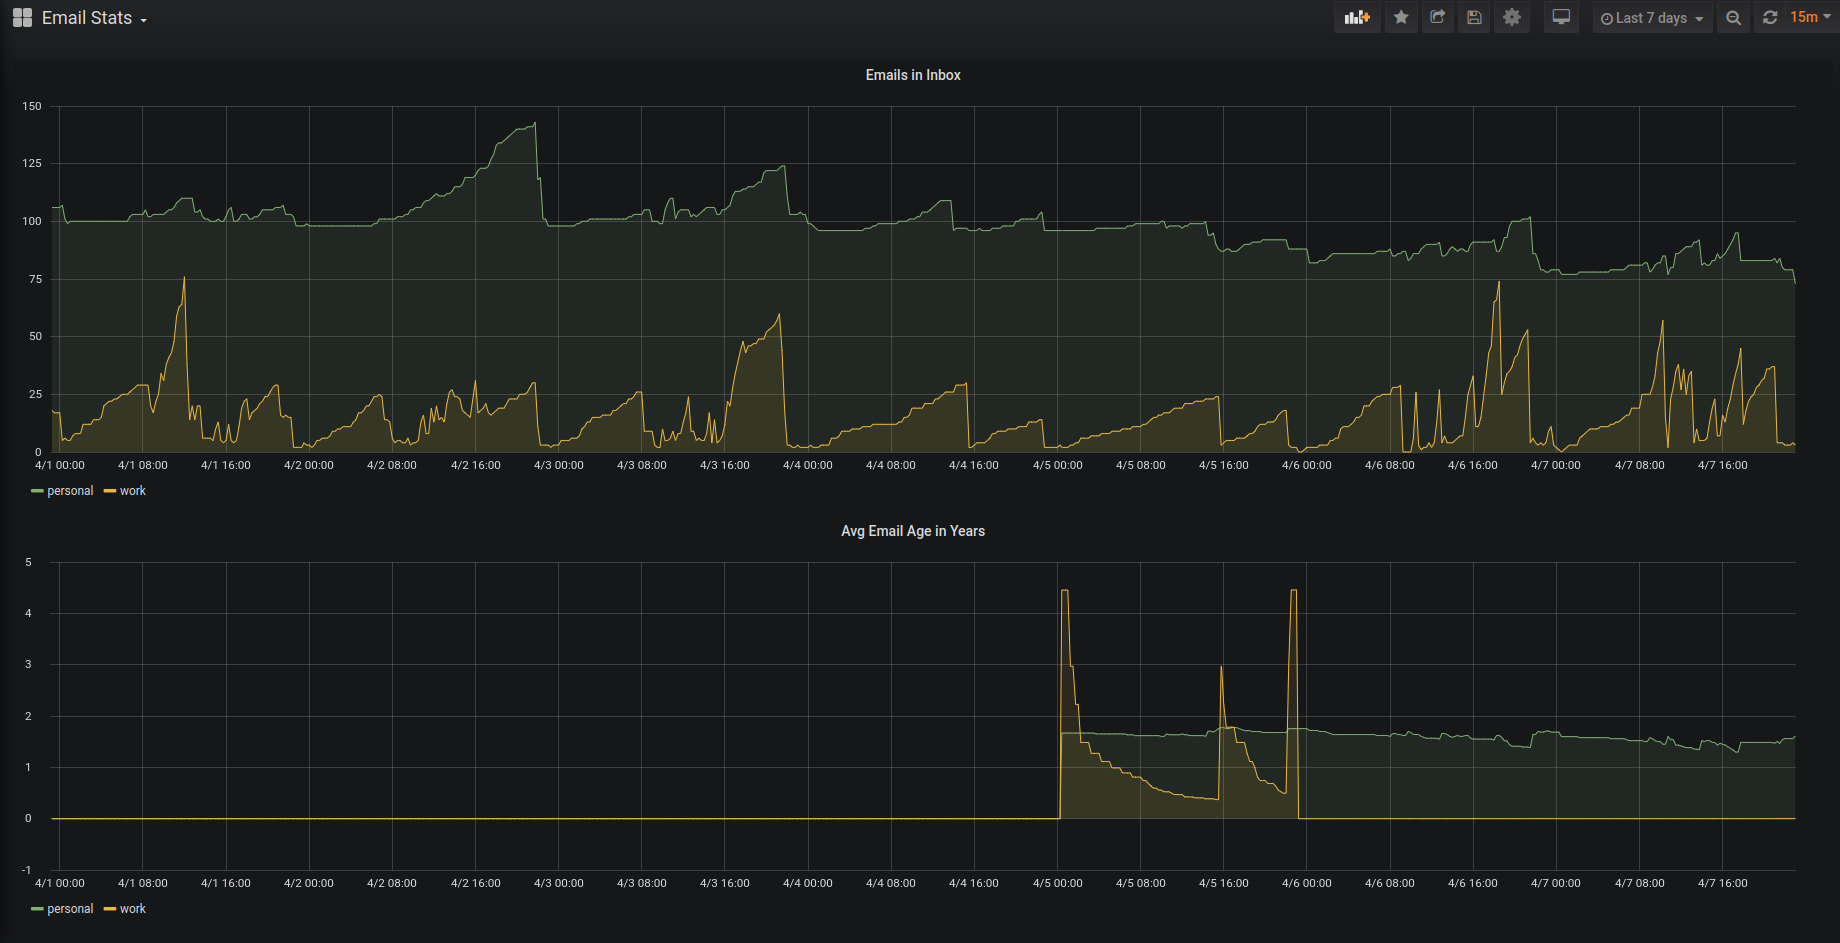 Grafana dashboard for emails in inbox and the avg age